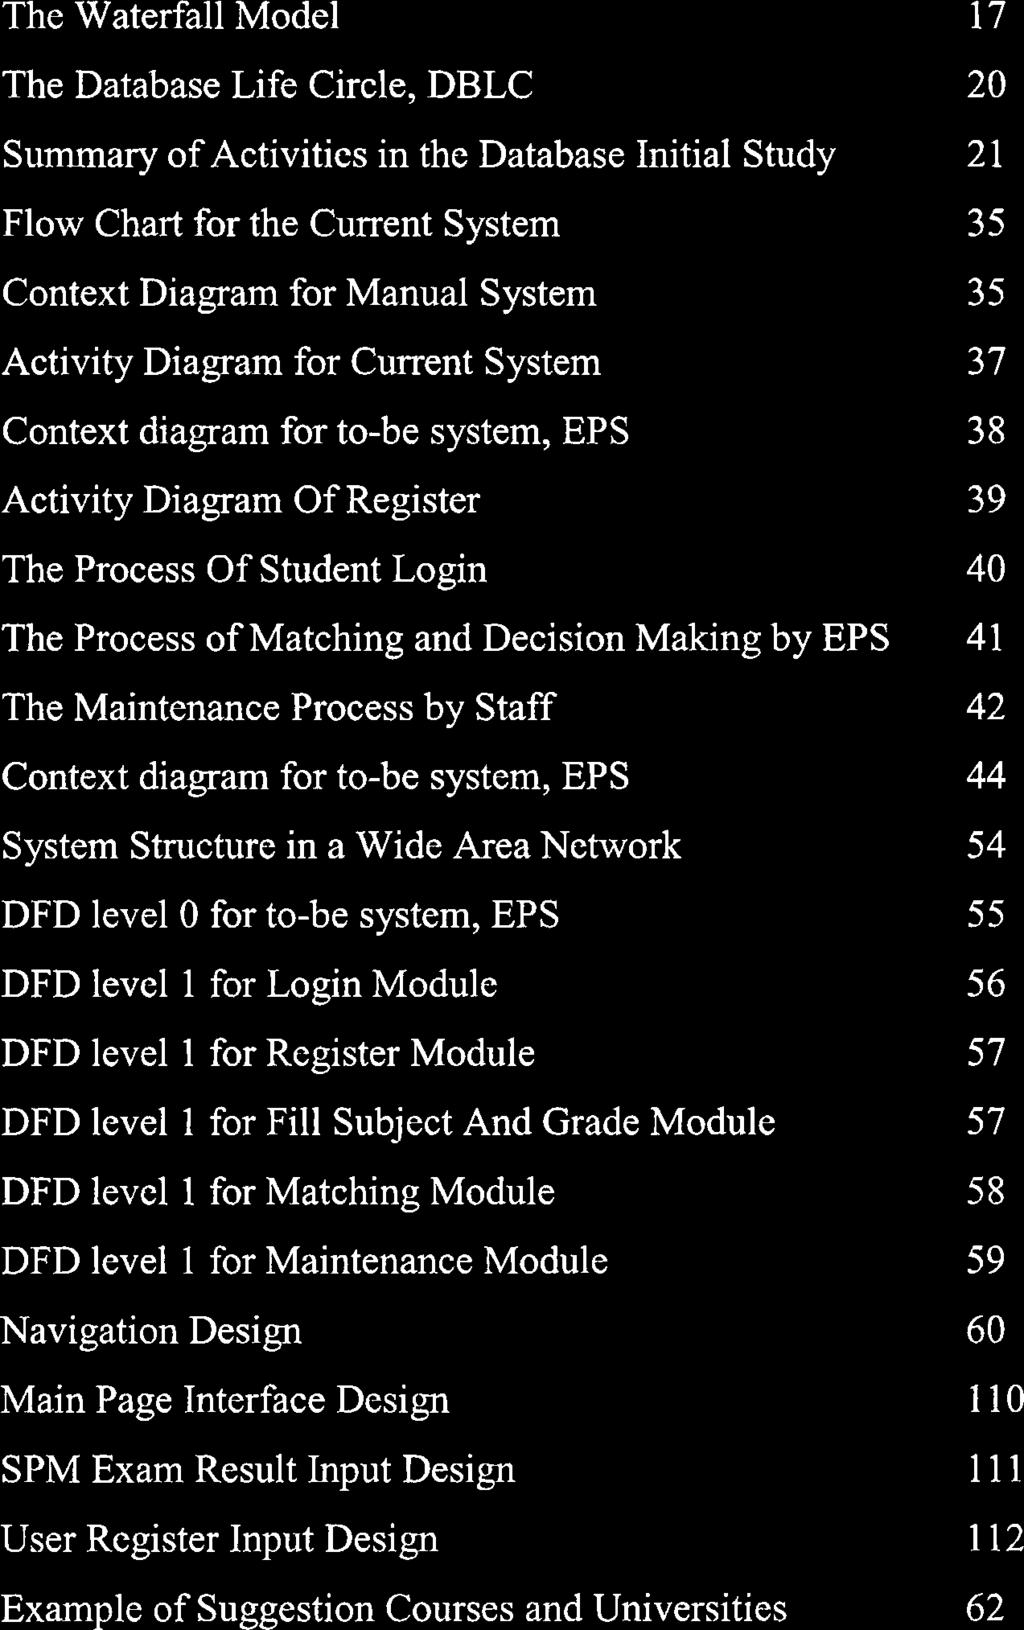 LIST OF FIGURES FIGURE TITLE PAGE The Waterfall Model 17 The Database Life Circle, DBLC 20 Summary of Activities in the Database Initial Study 21 Flow Chart for the Current System 35 Context Diagram